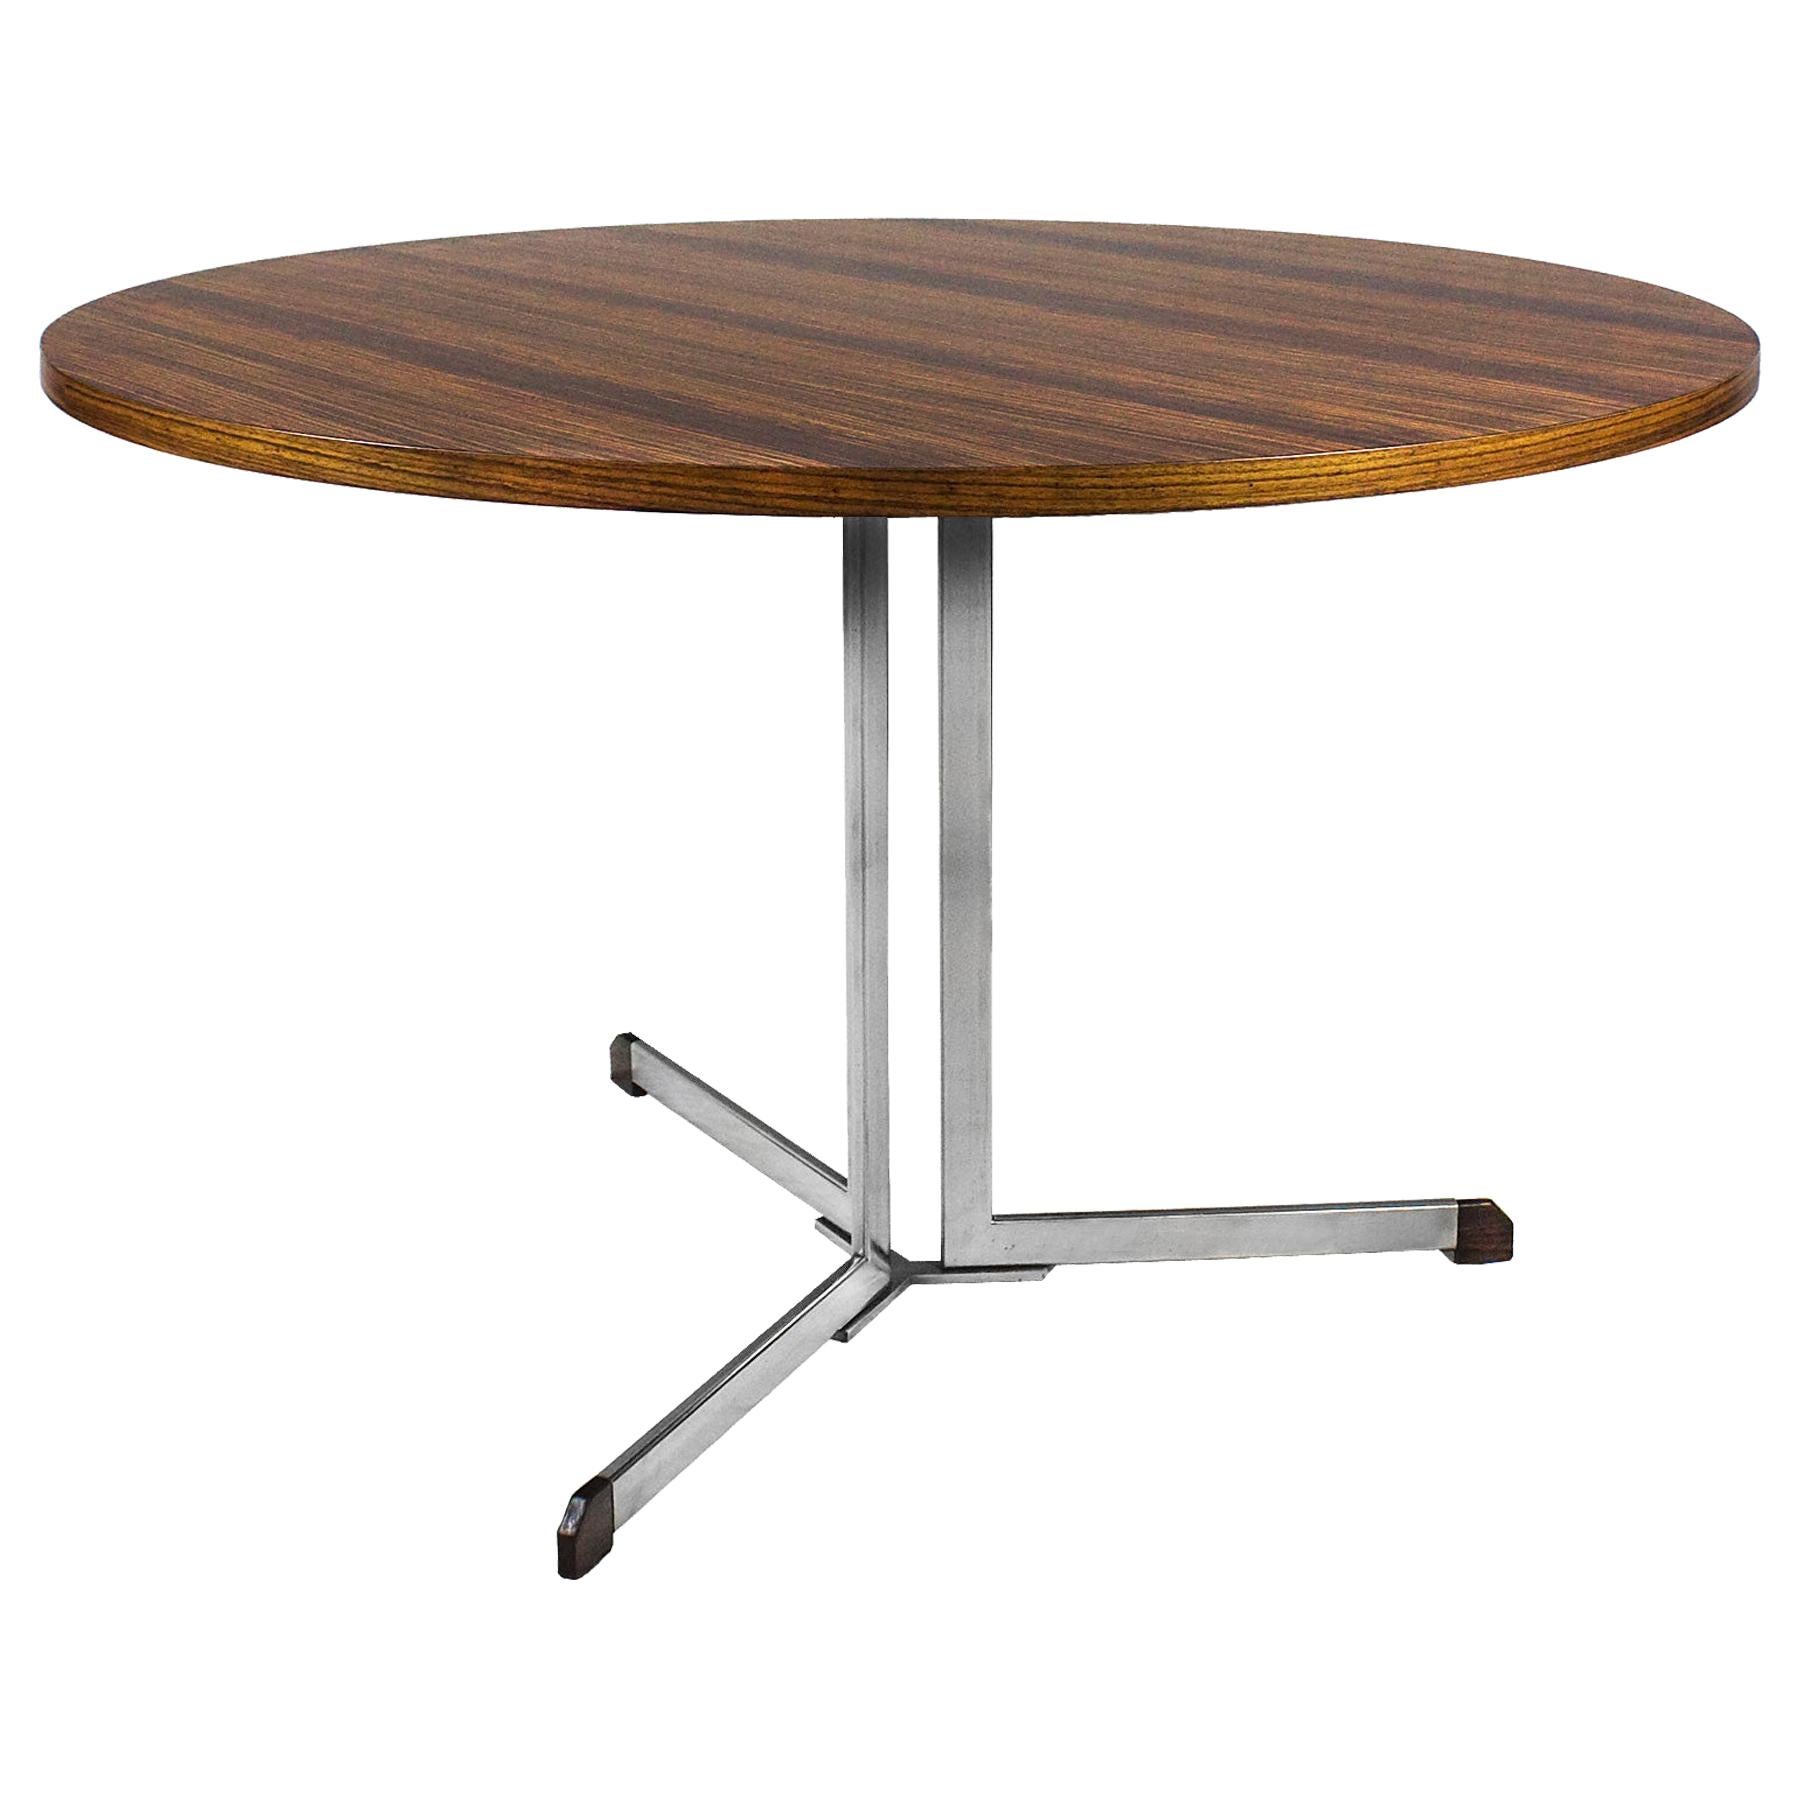 1950s Round Table, Nickel-Plated Steel and Zebrano Veneer, Italy